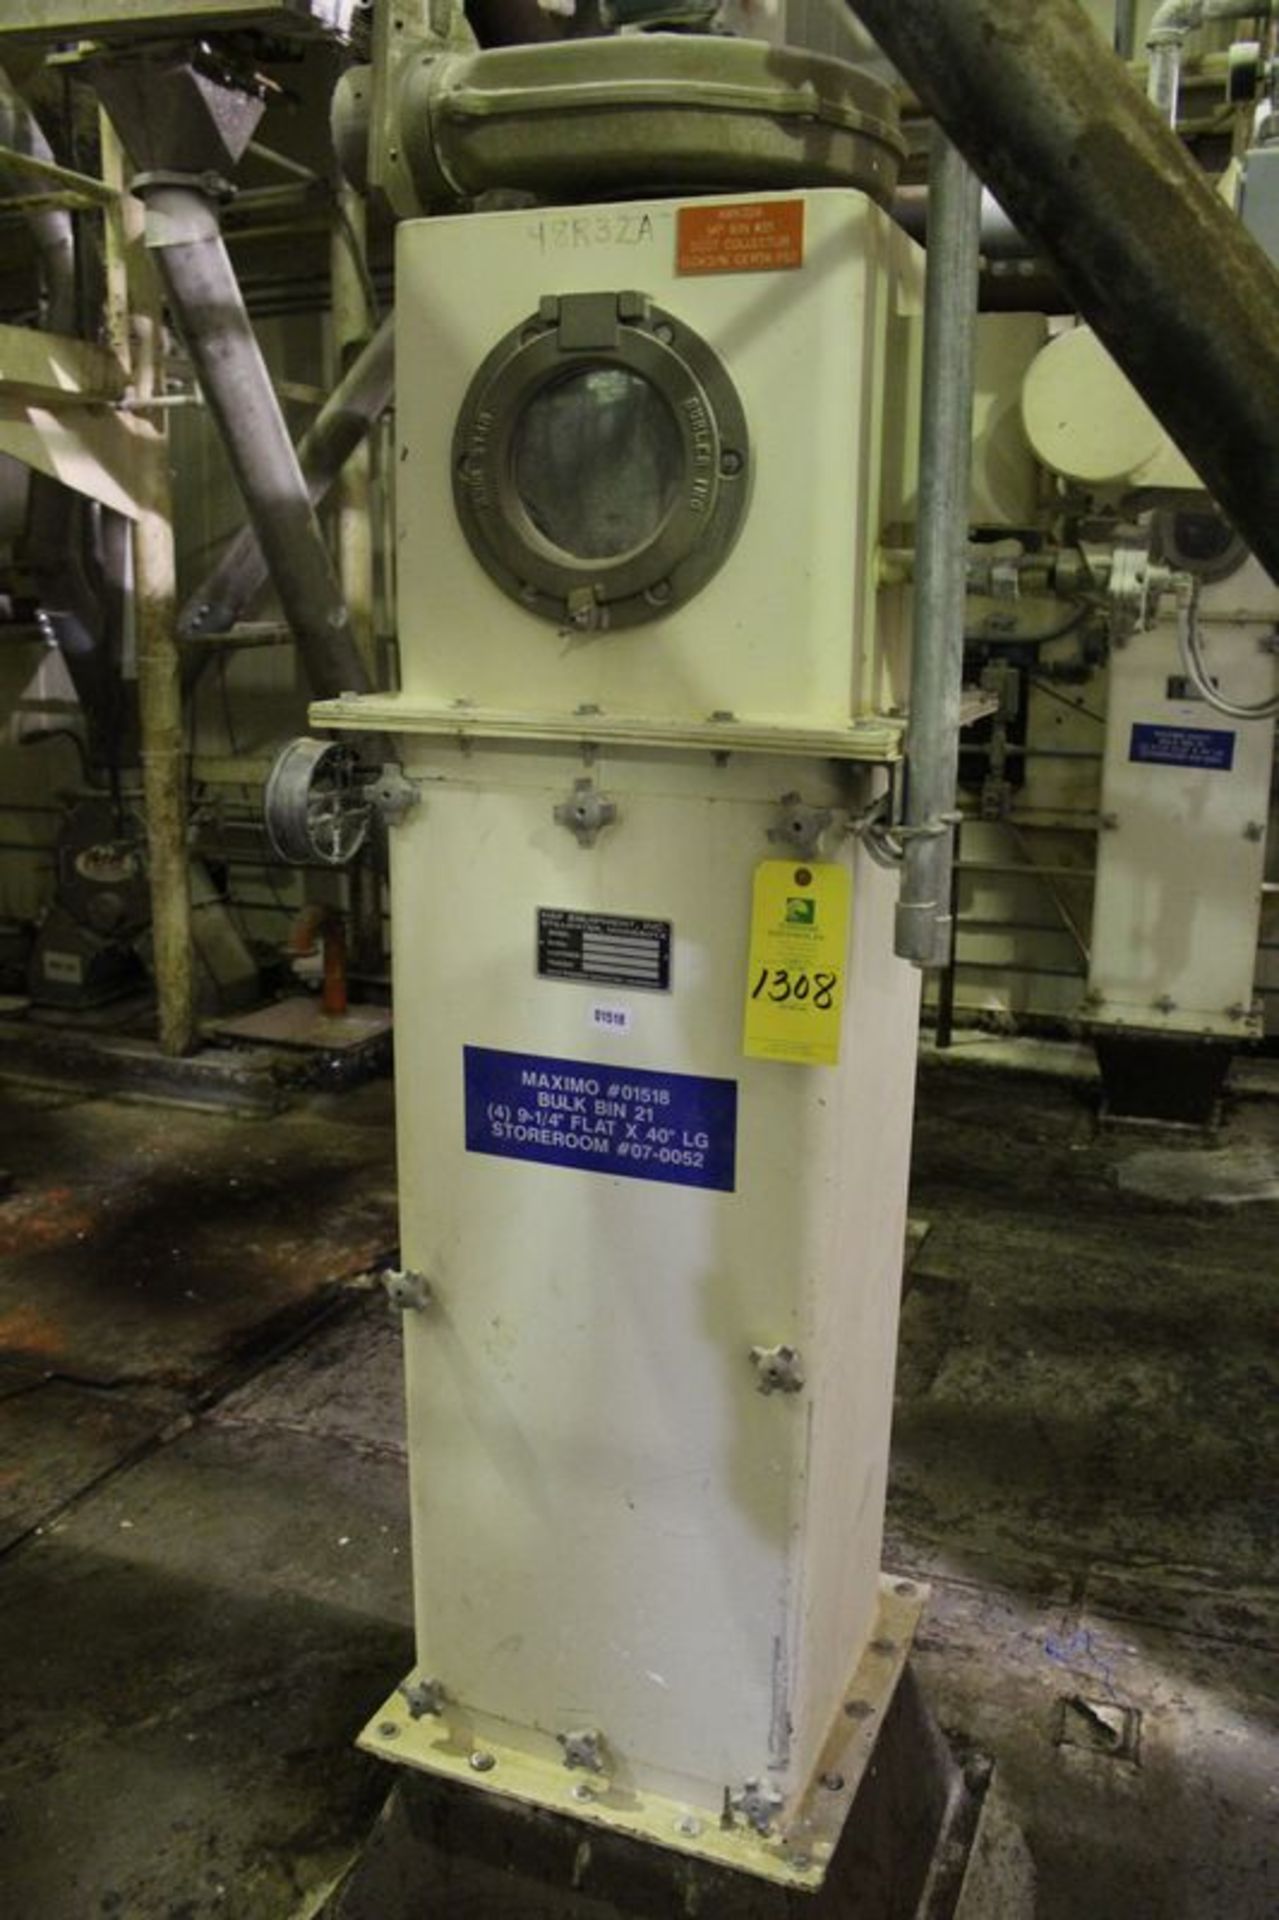 HAF Equipment Dust Collector, M# 36BV4 | (CP1 Fifth Floor)